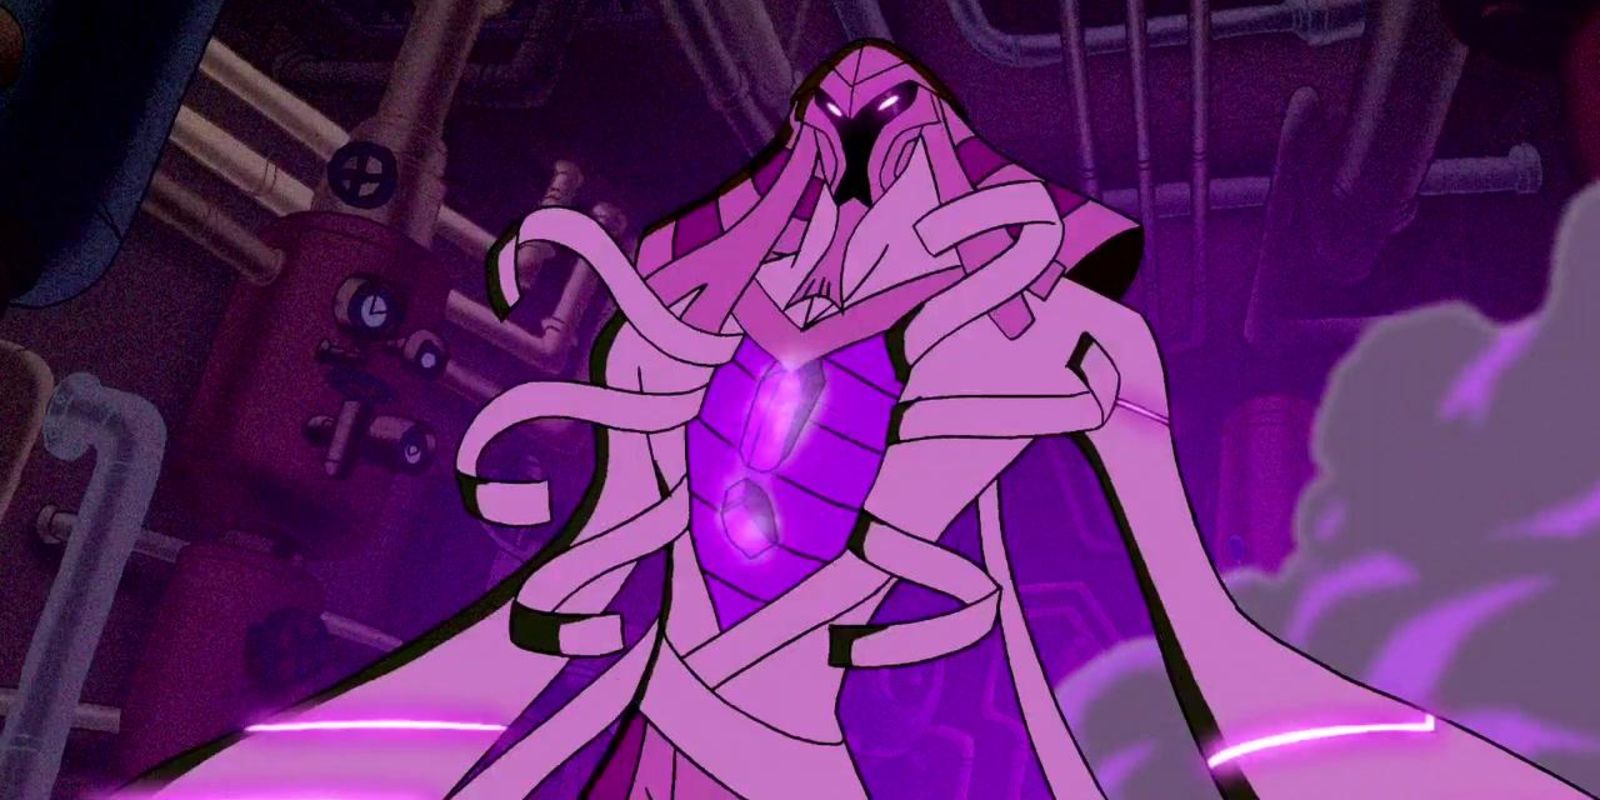 Snare-Oh unleashing his power in Ben 10.